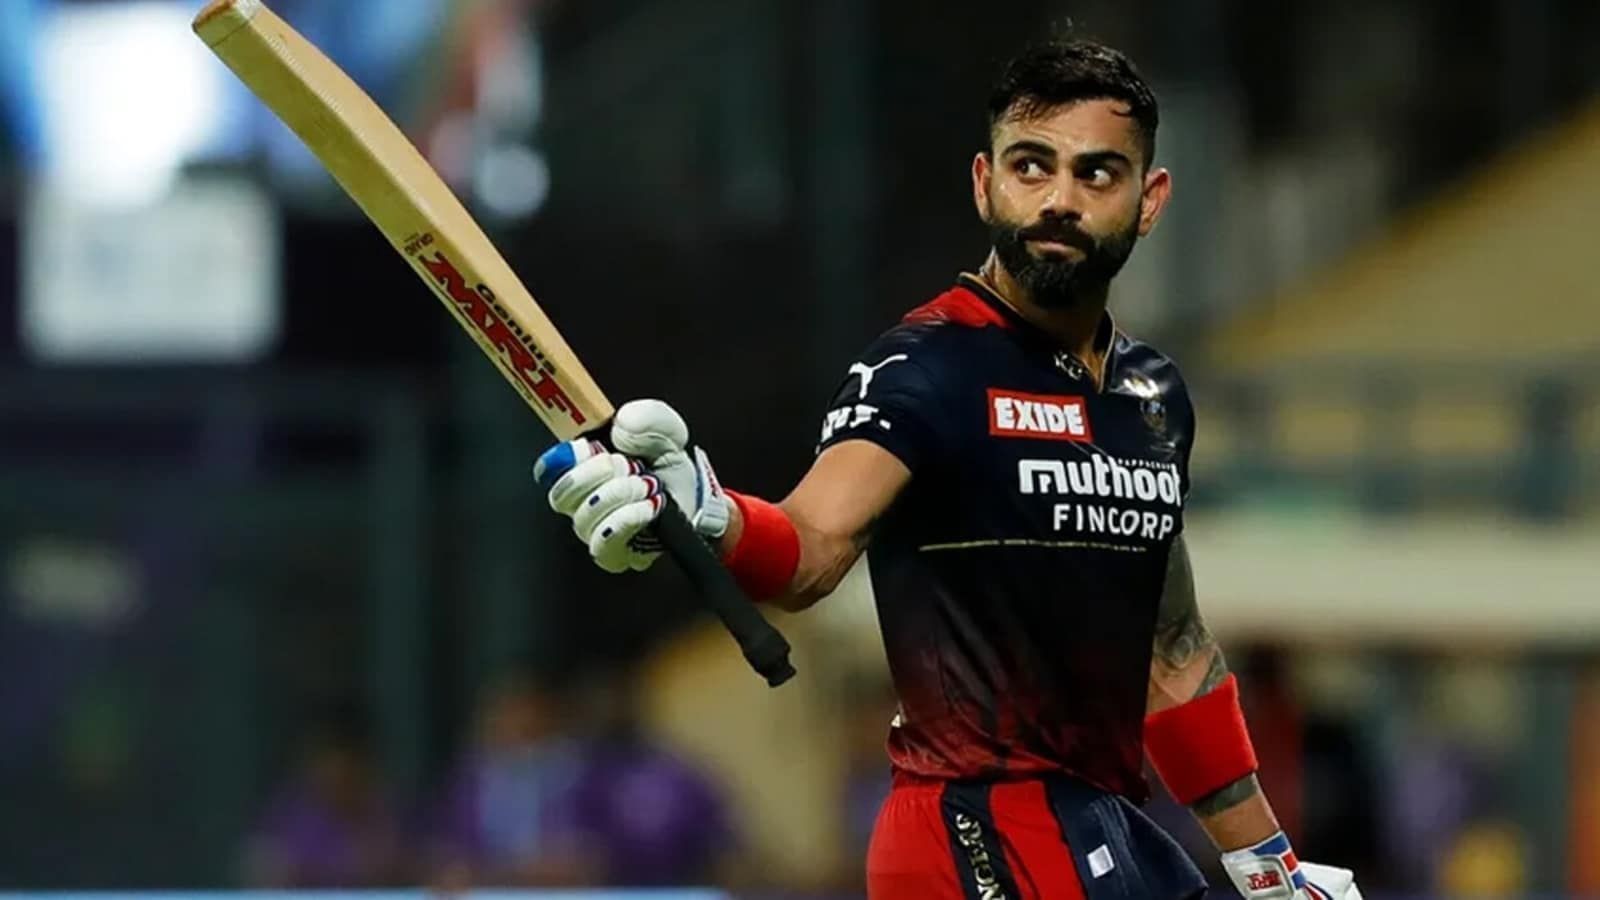 With RCB due to play 7 games in Bangalore, King Kohli could have a big season with the bat